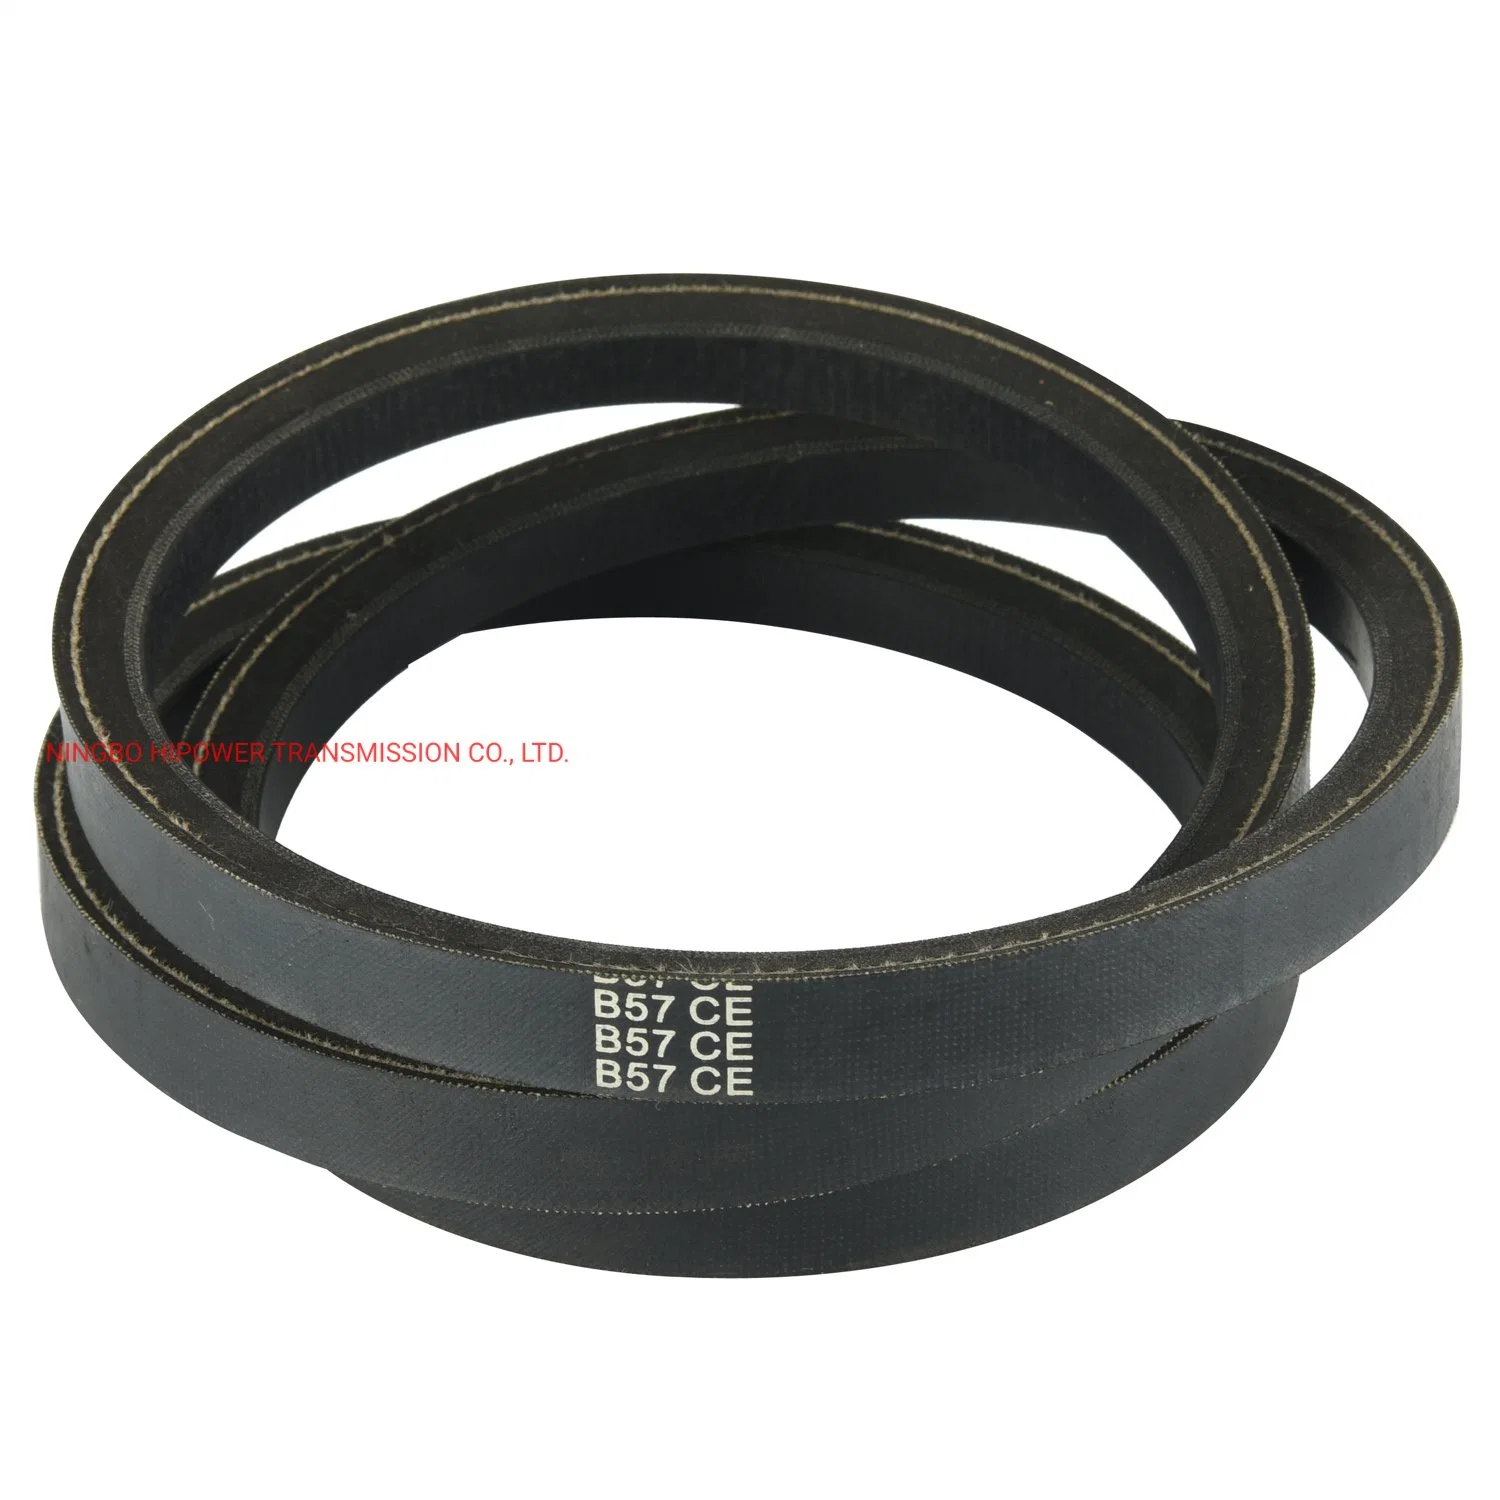 Aramid Motorcycle Auto Rubber Belt Transmission Parts for Car Raw Edged Cogged V Belt